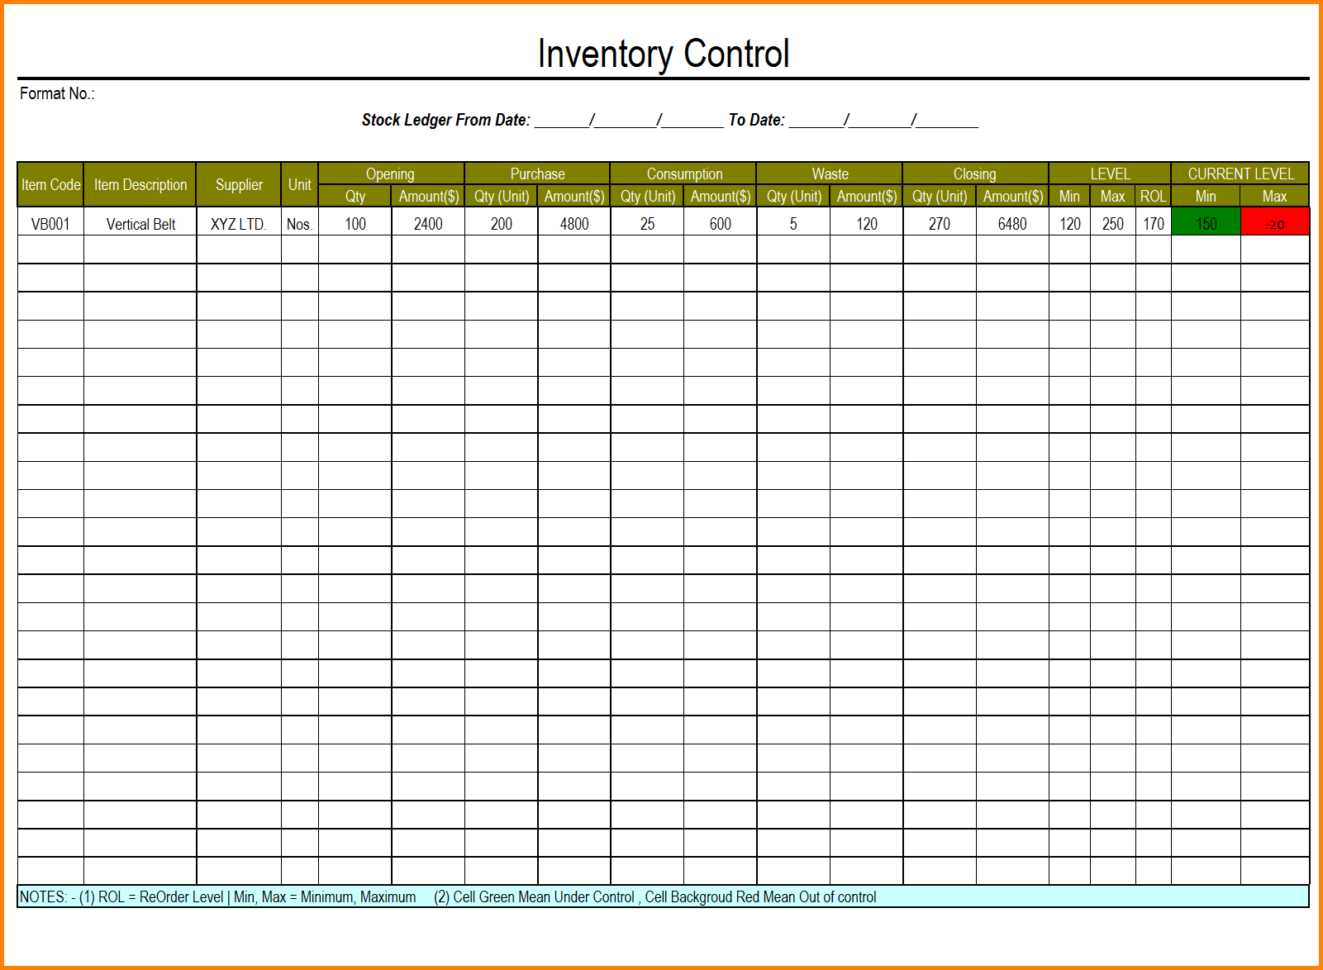 Words Their Way Spelling Inventory Excel Spreadsheet Pertaining To Inventory Tracking Spreadsheet Excel And Control Template Invoice